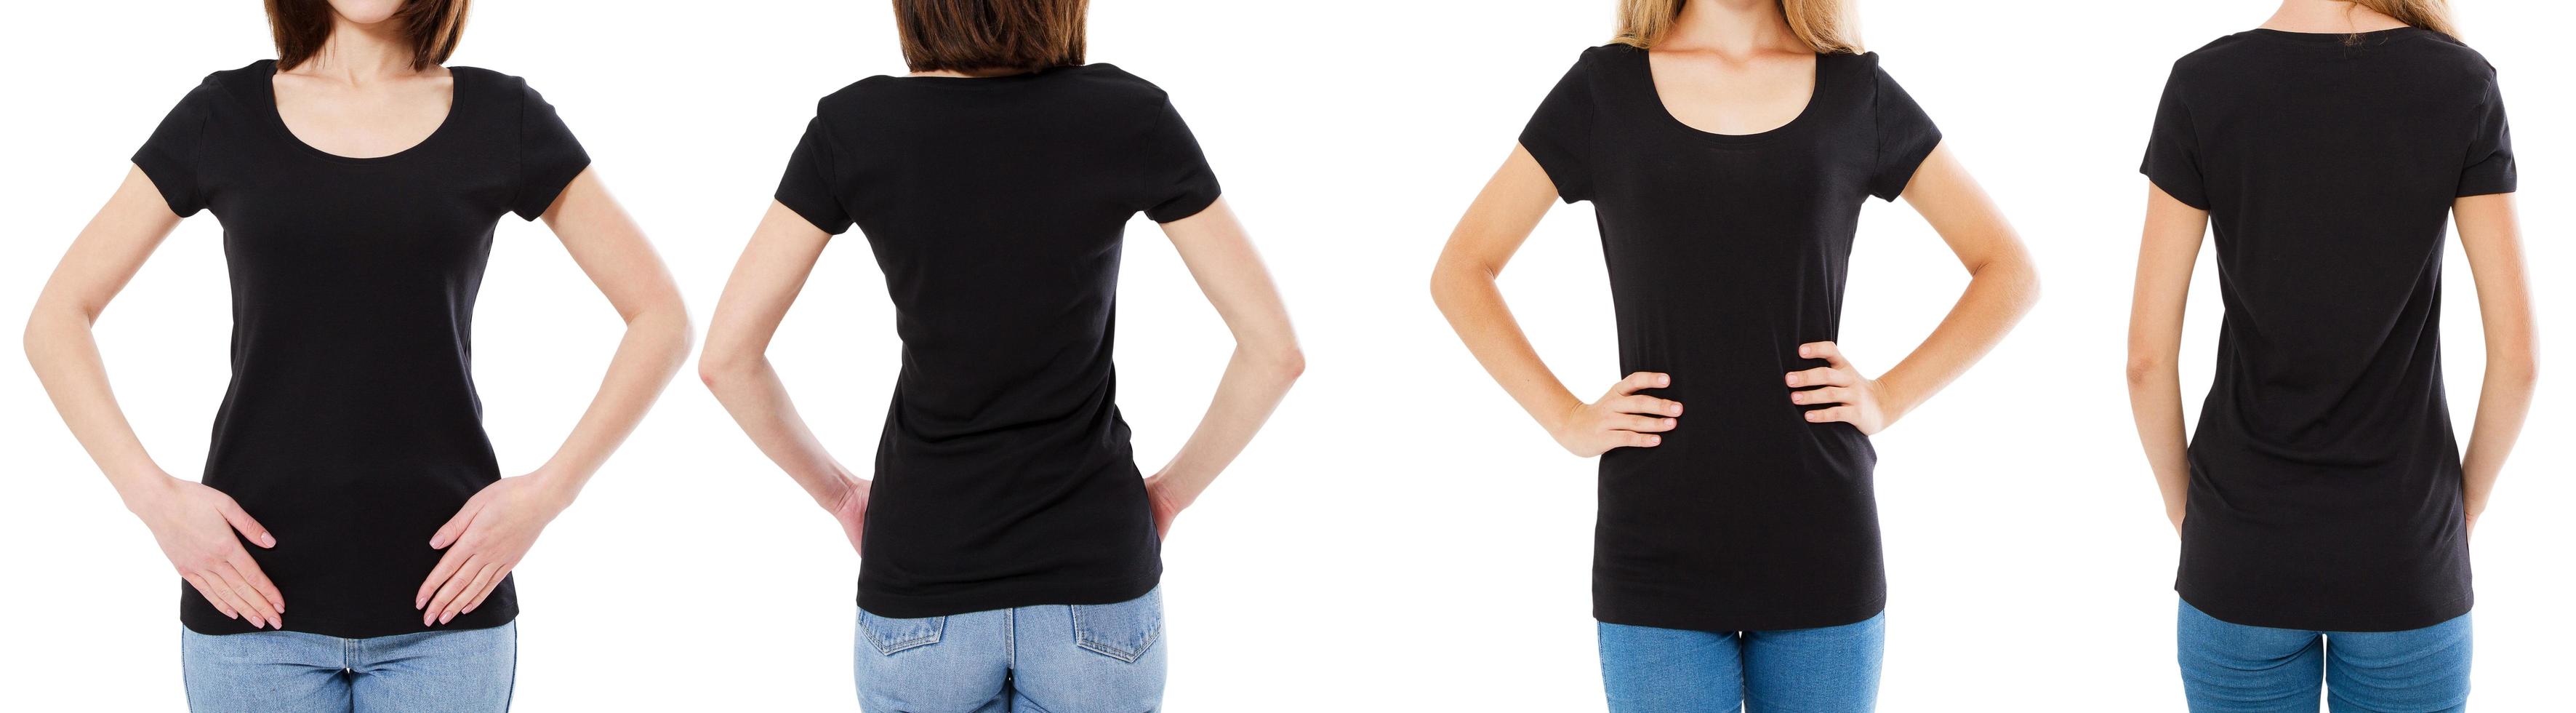 Two woman in black t-shirt  cropped image front and rear view, t-shirt set, mockup tshirt blank photo